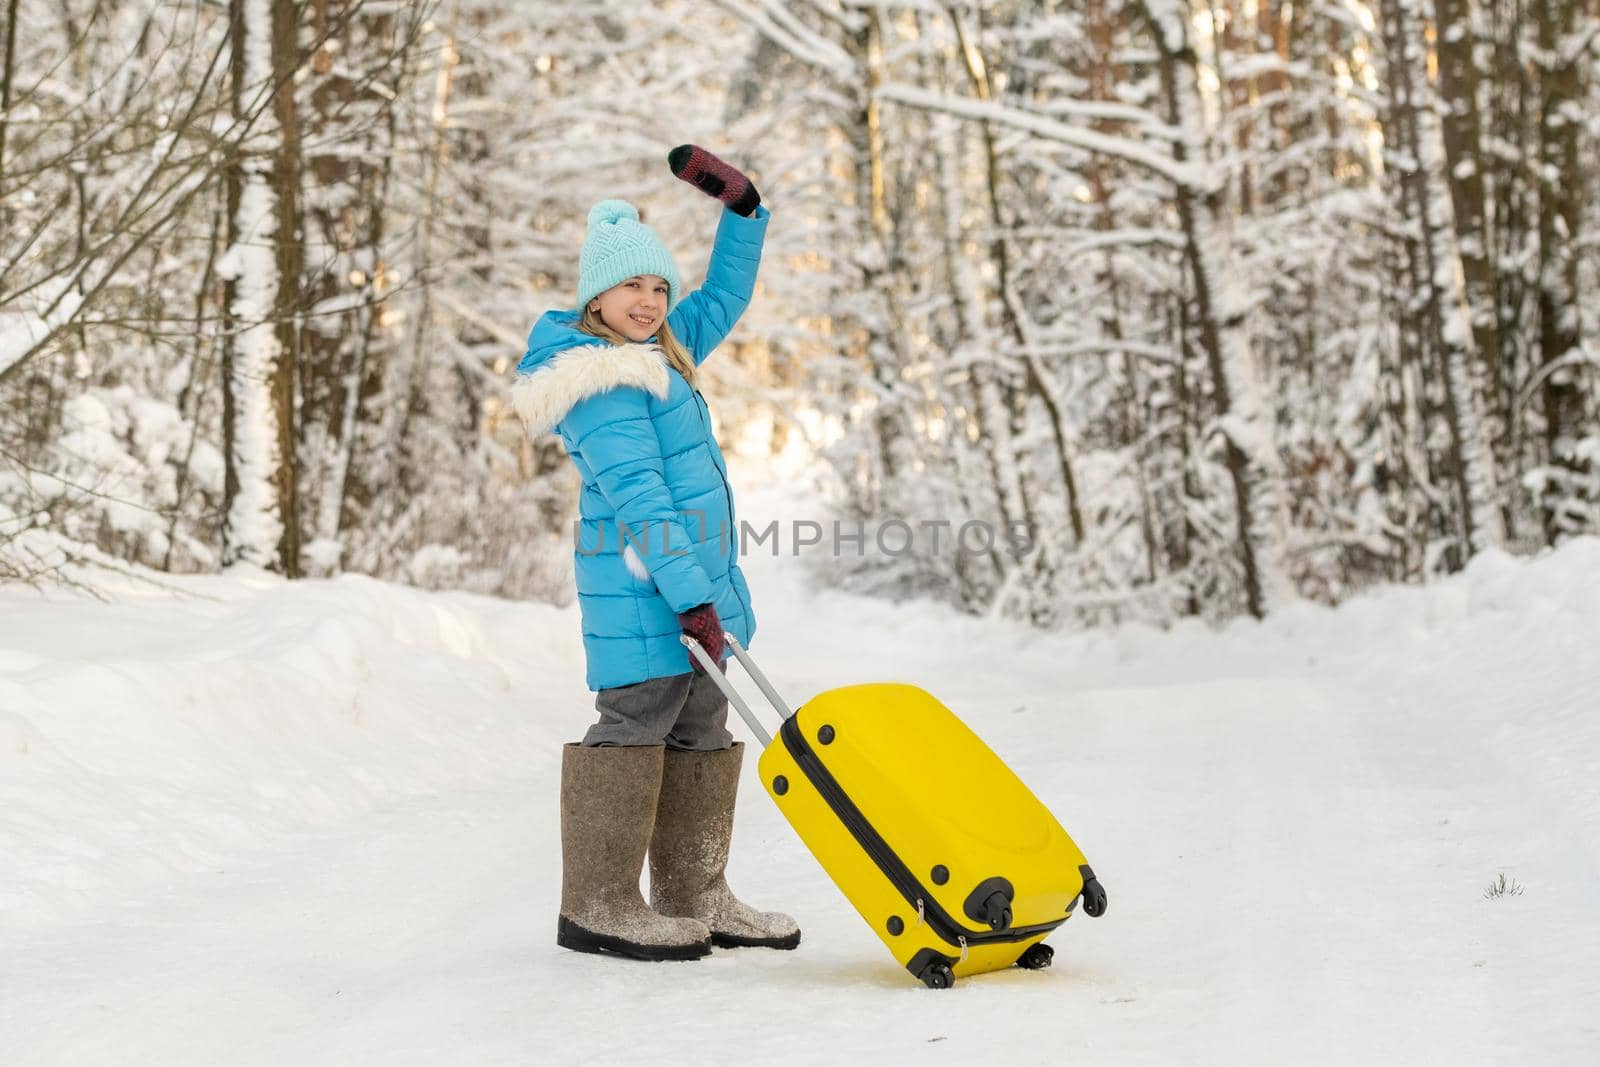 A girl in winter in felt boots goes with a suitcase on a frosty snowy day by Lobachad